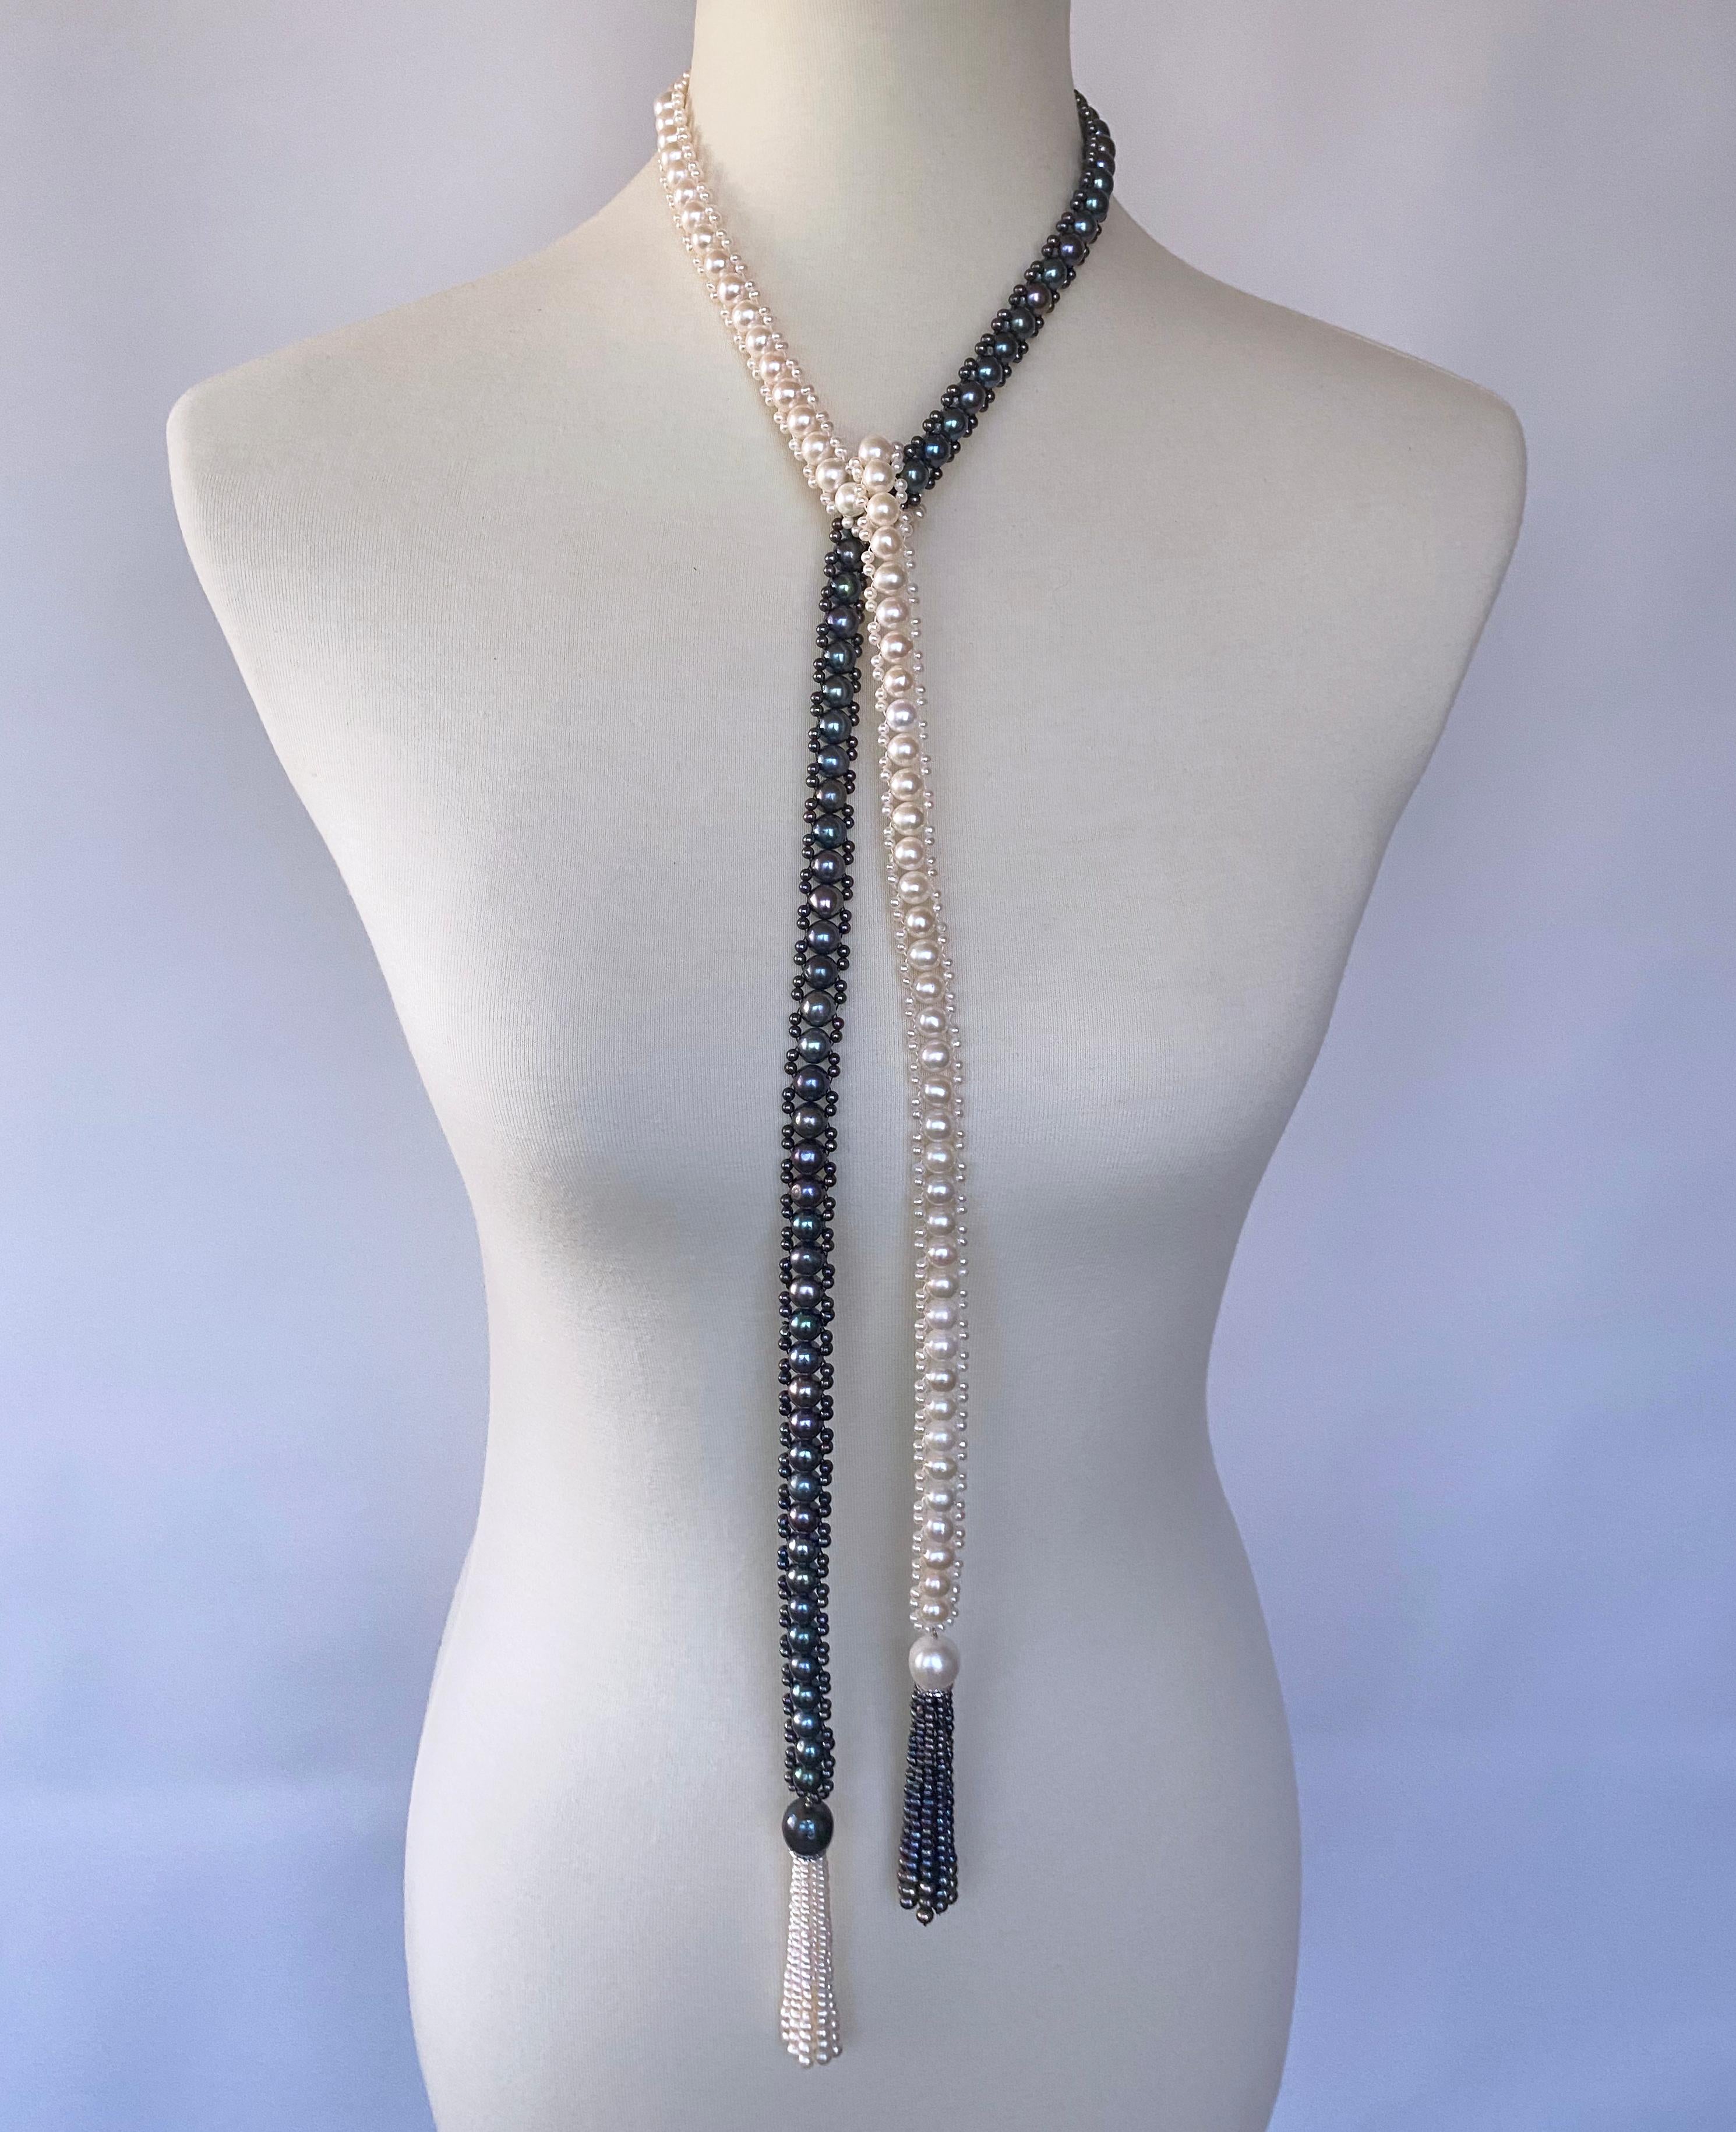 Classic Sautoir by Marina J. This stunning 'Art Deco' inspired piece is made of all cultured Black & White Pearls woven together into a lace like column. The White Pearls display a wonderful luster and the Black Pearls radiate an almost 'oil spill'